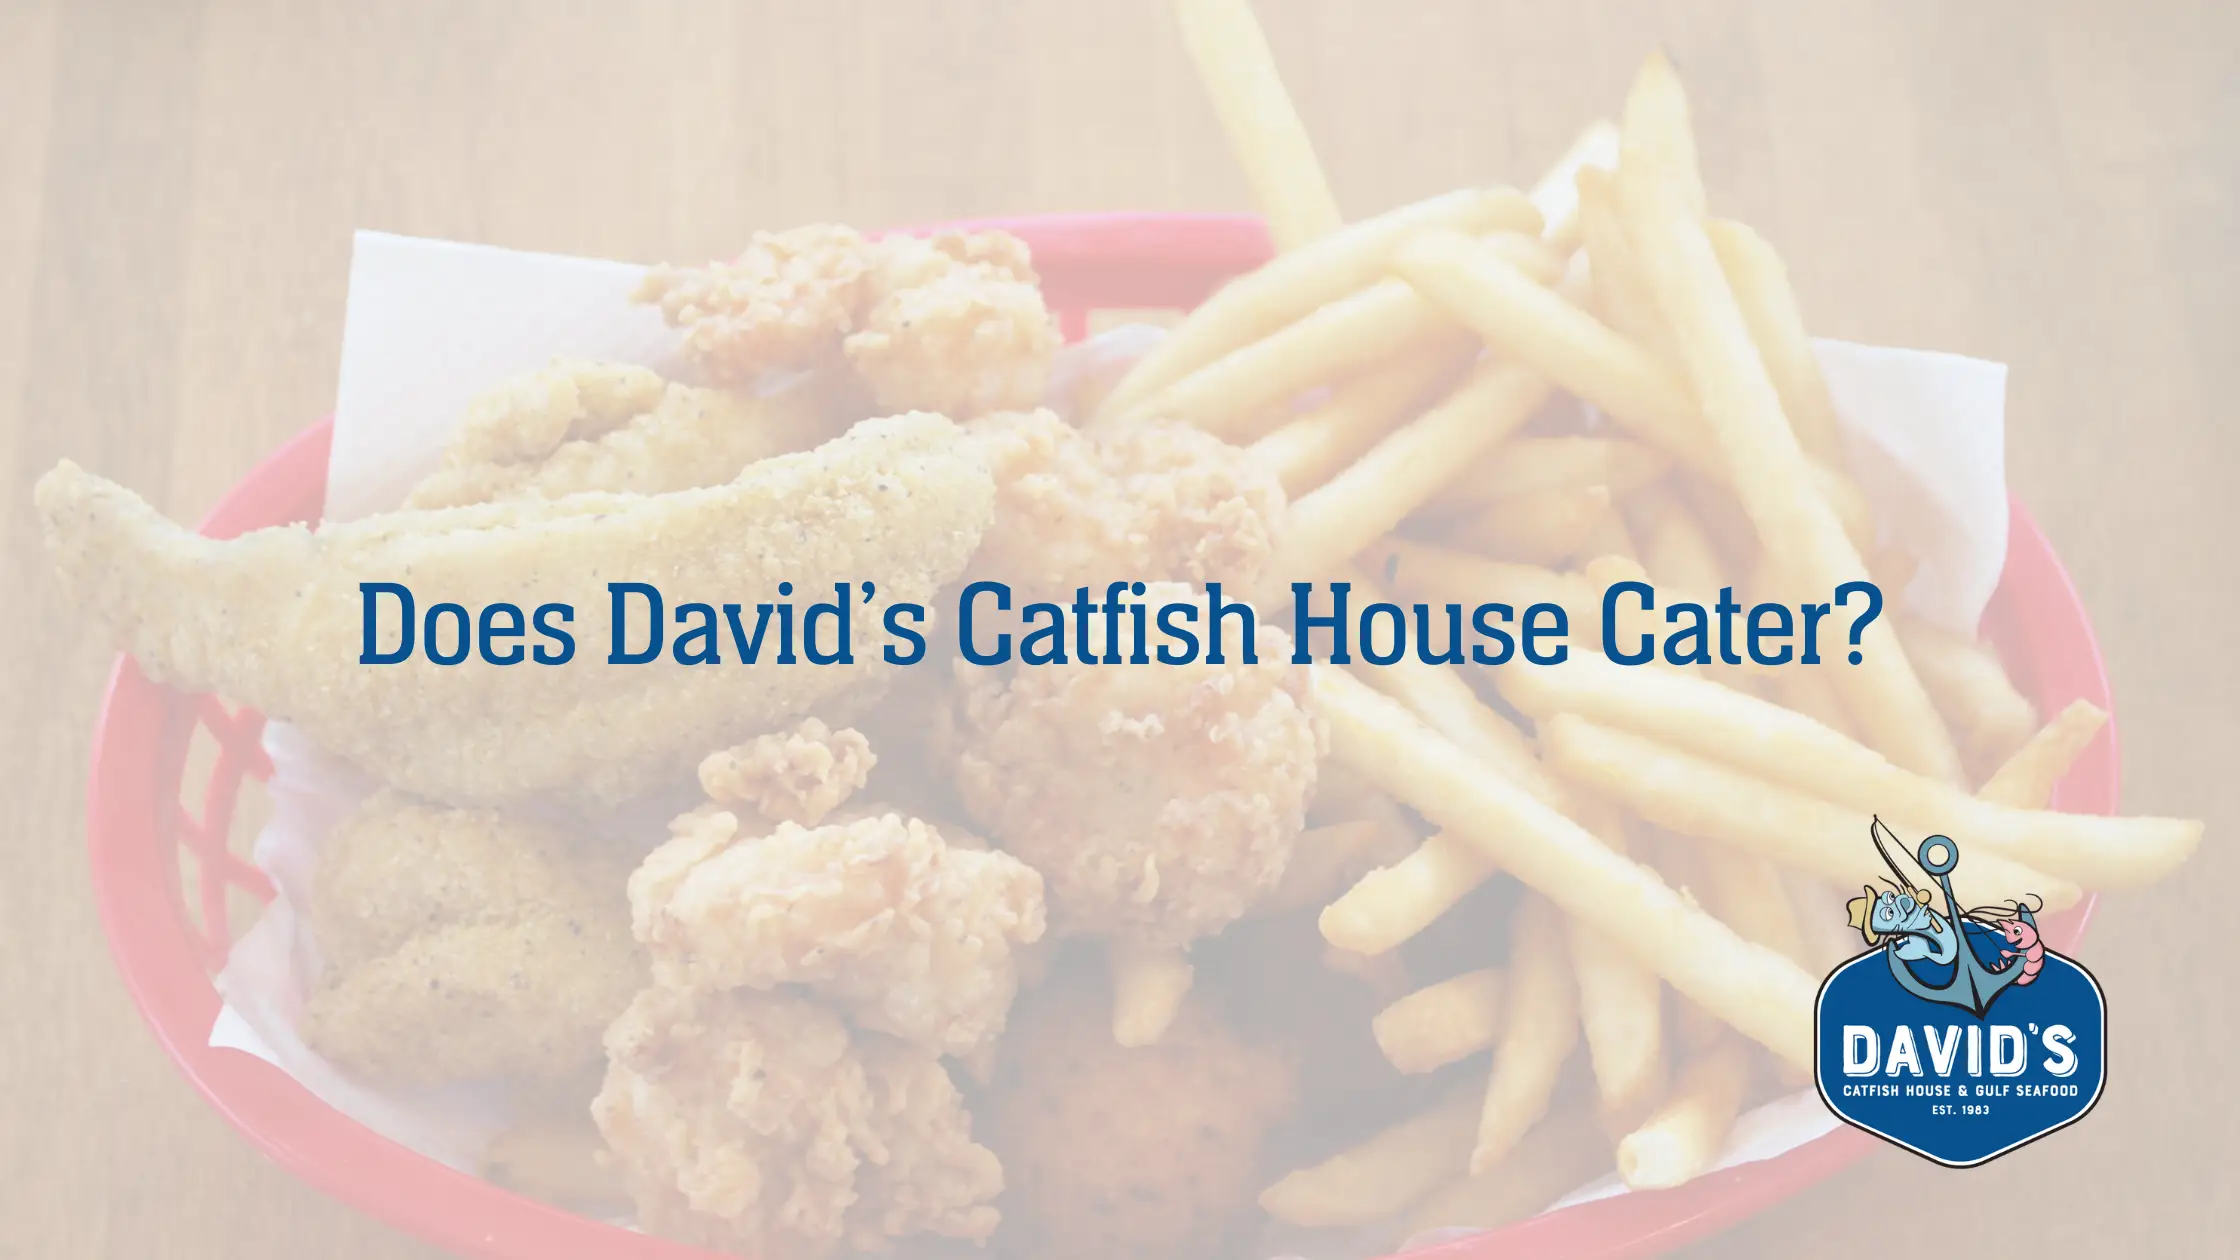 Does David's Catfish House Cater?